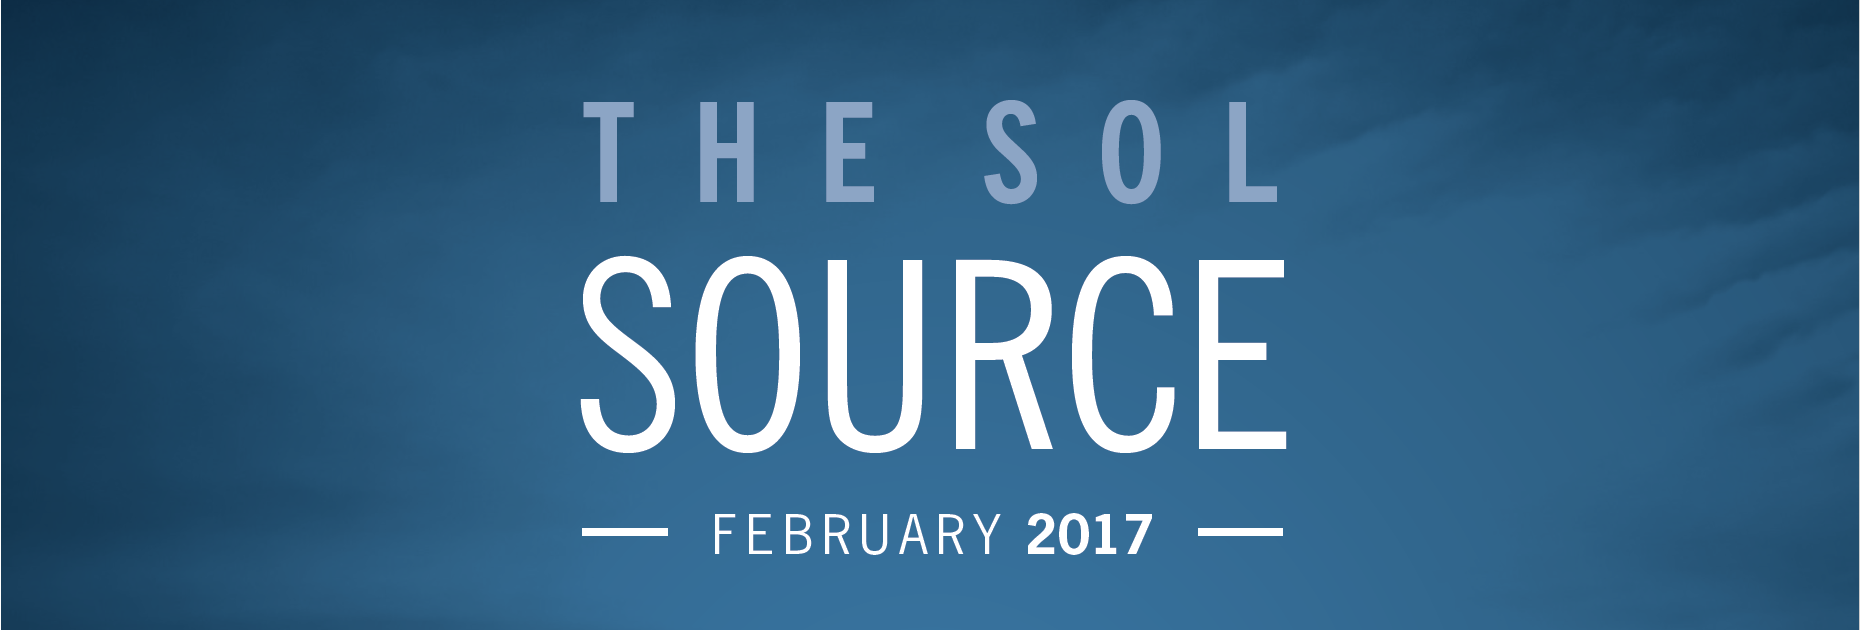 The Sol SOURCE, February 2017